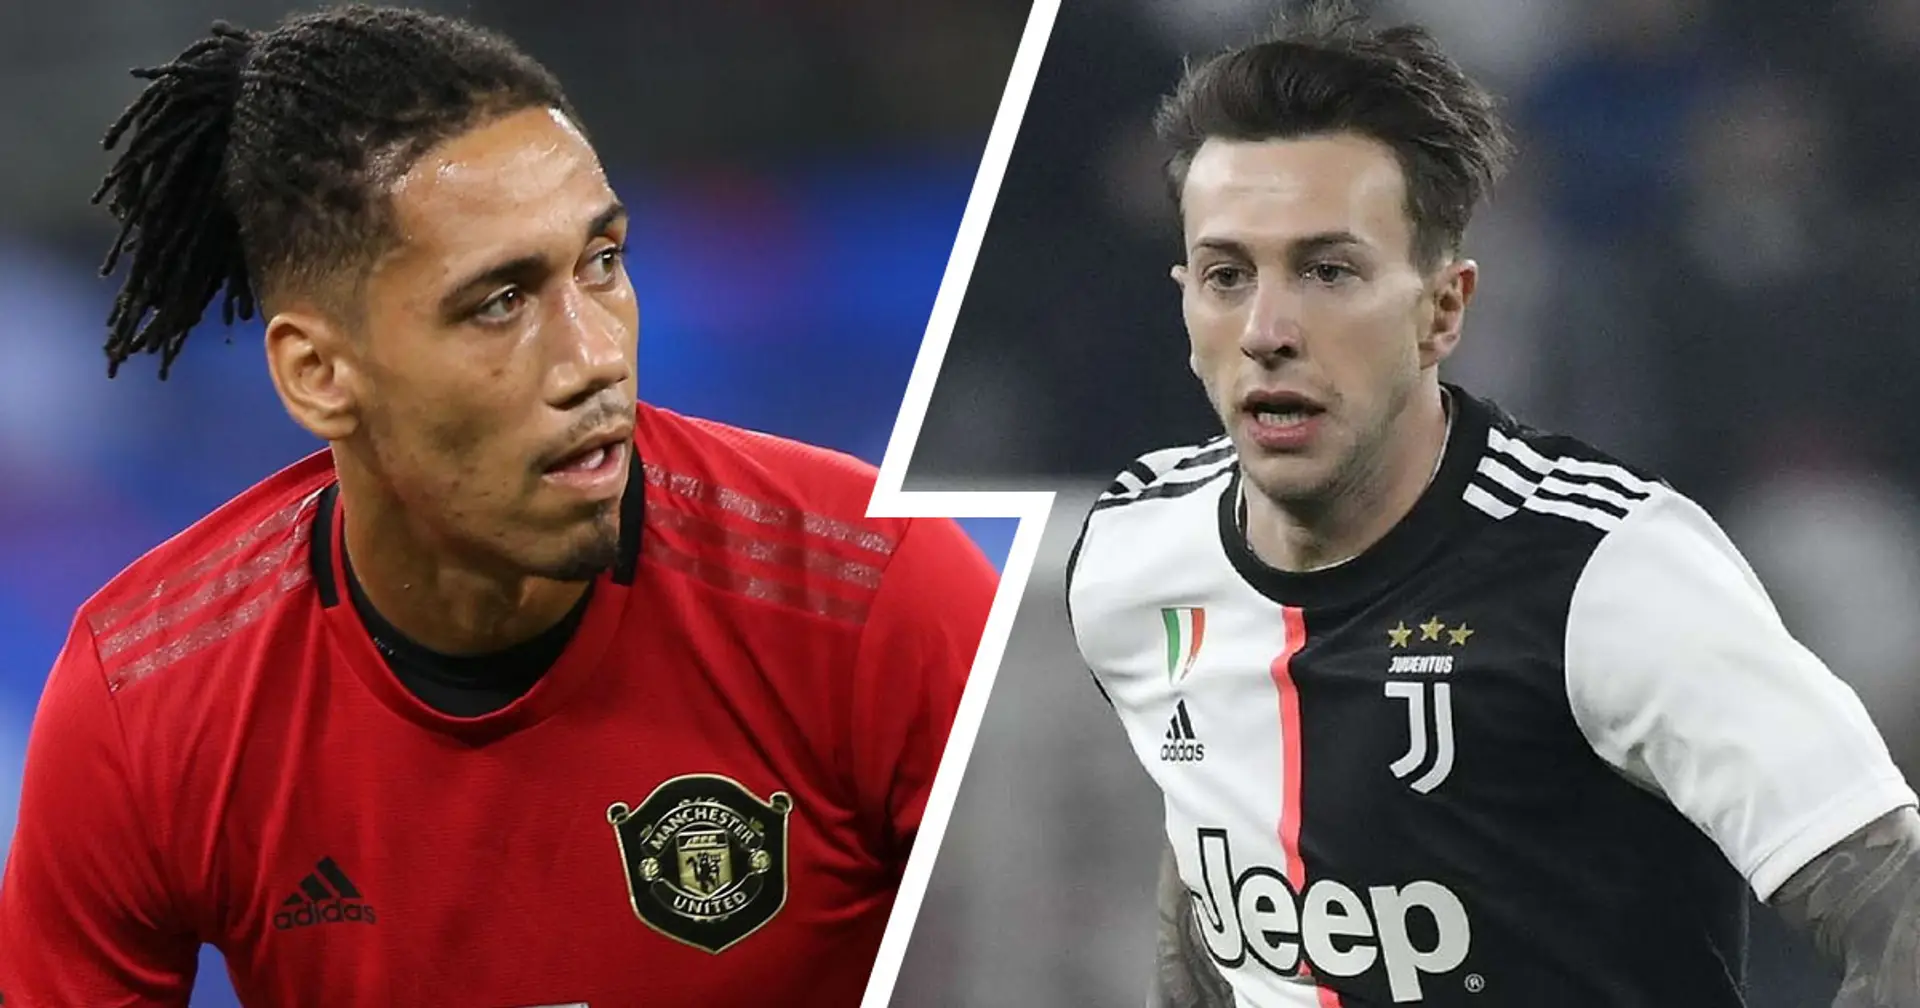 Juventus ‘considering offering Federico Bernardeschi’ in swap deal to sign Smalling from United